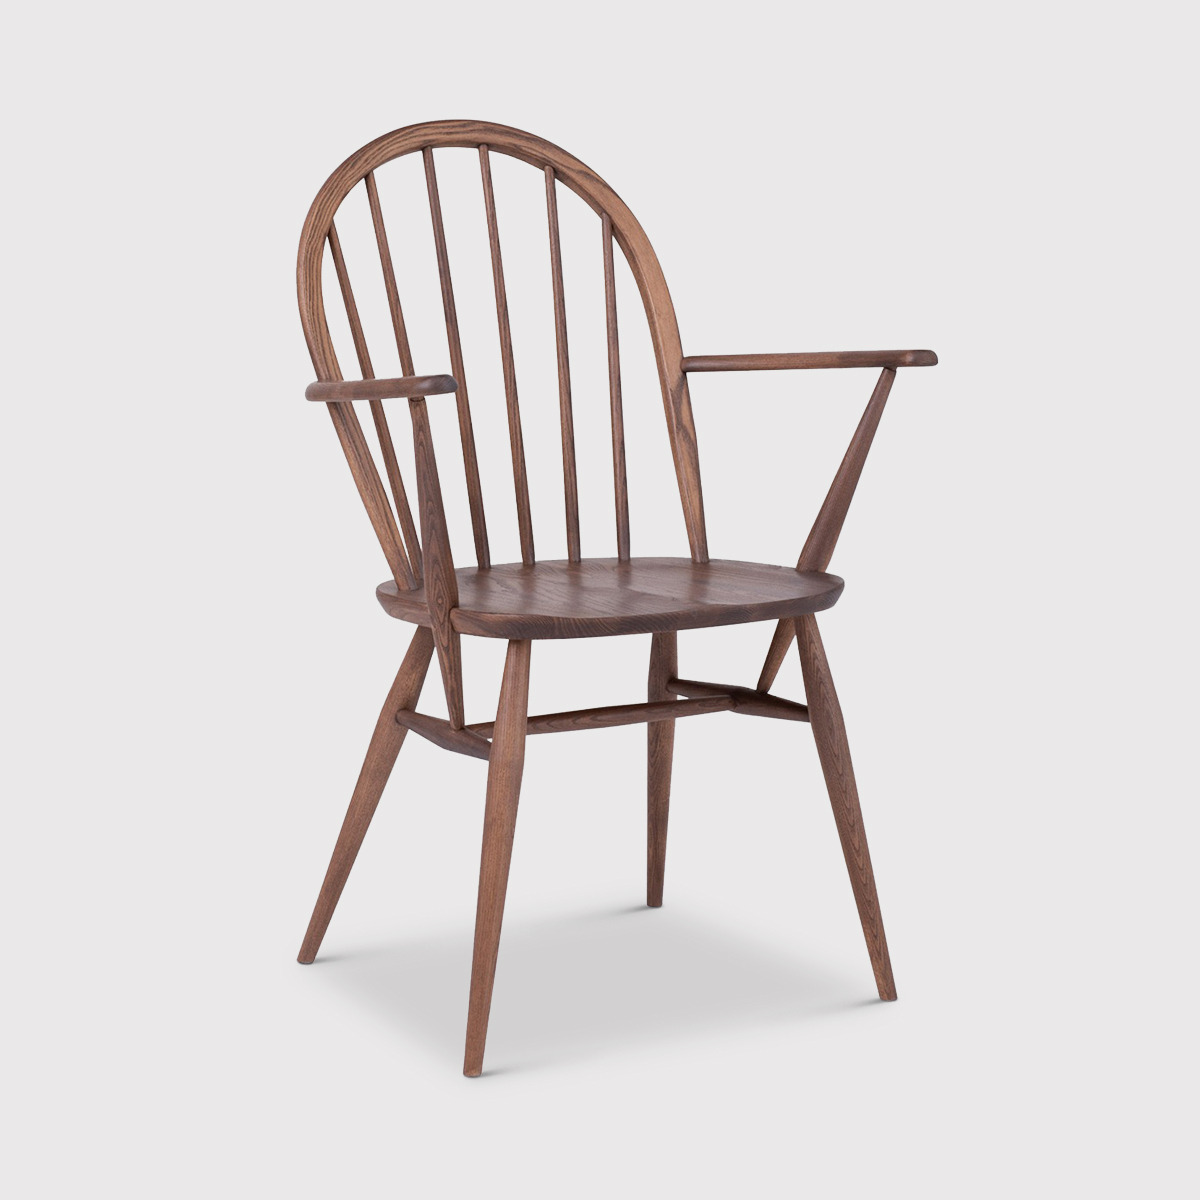 L.Ercolani Utility Armchair, Wood - Barker & Stonehouse - image 1